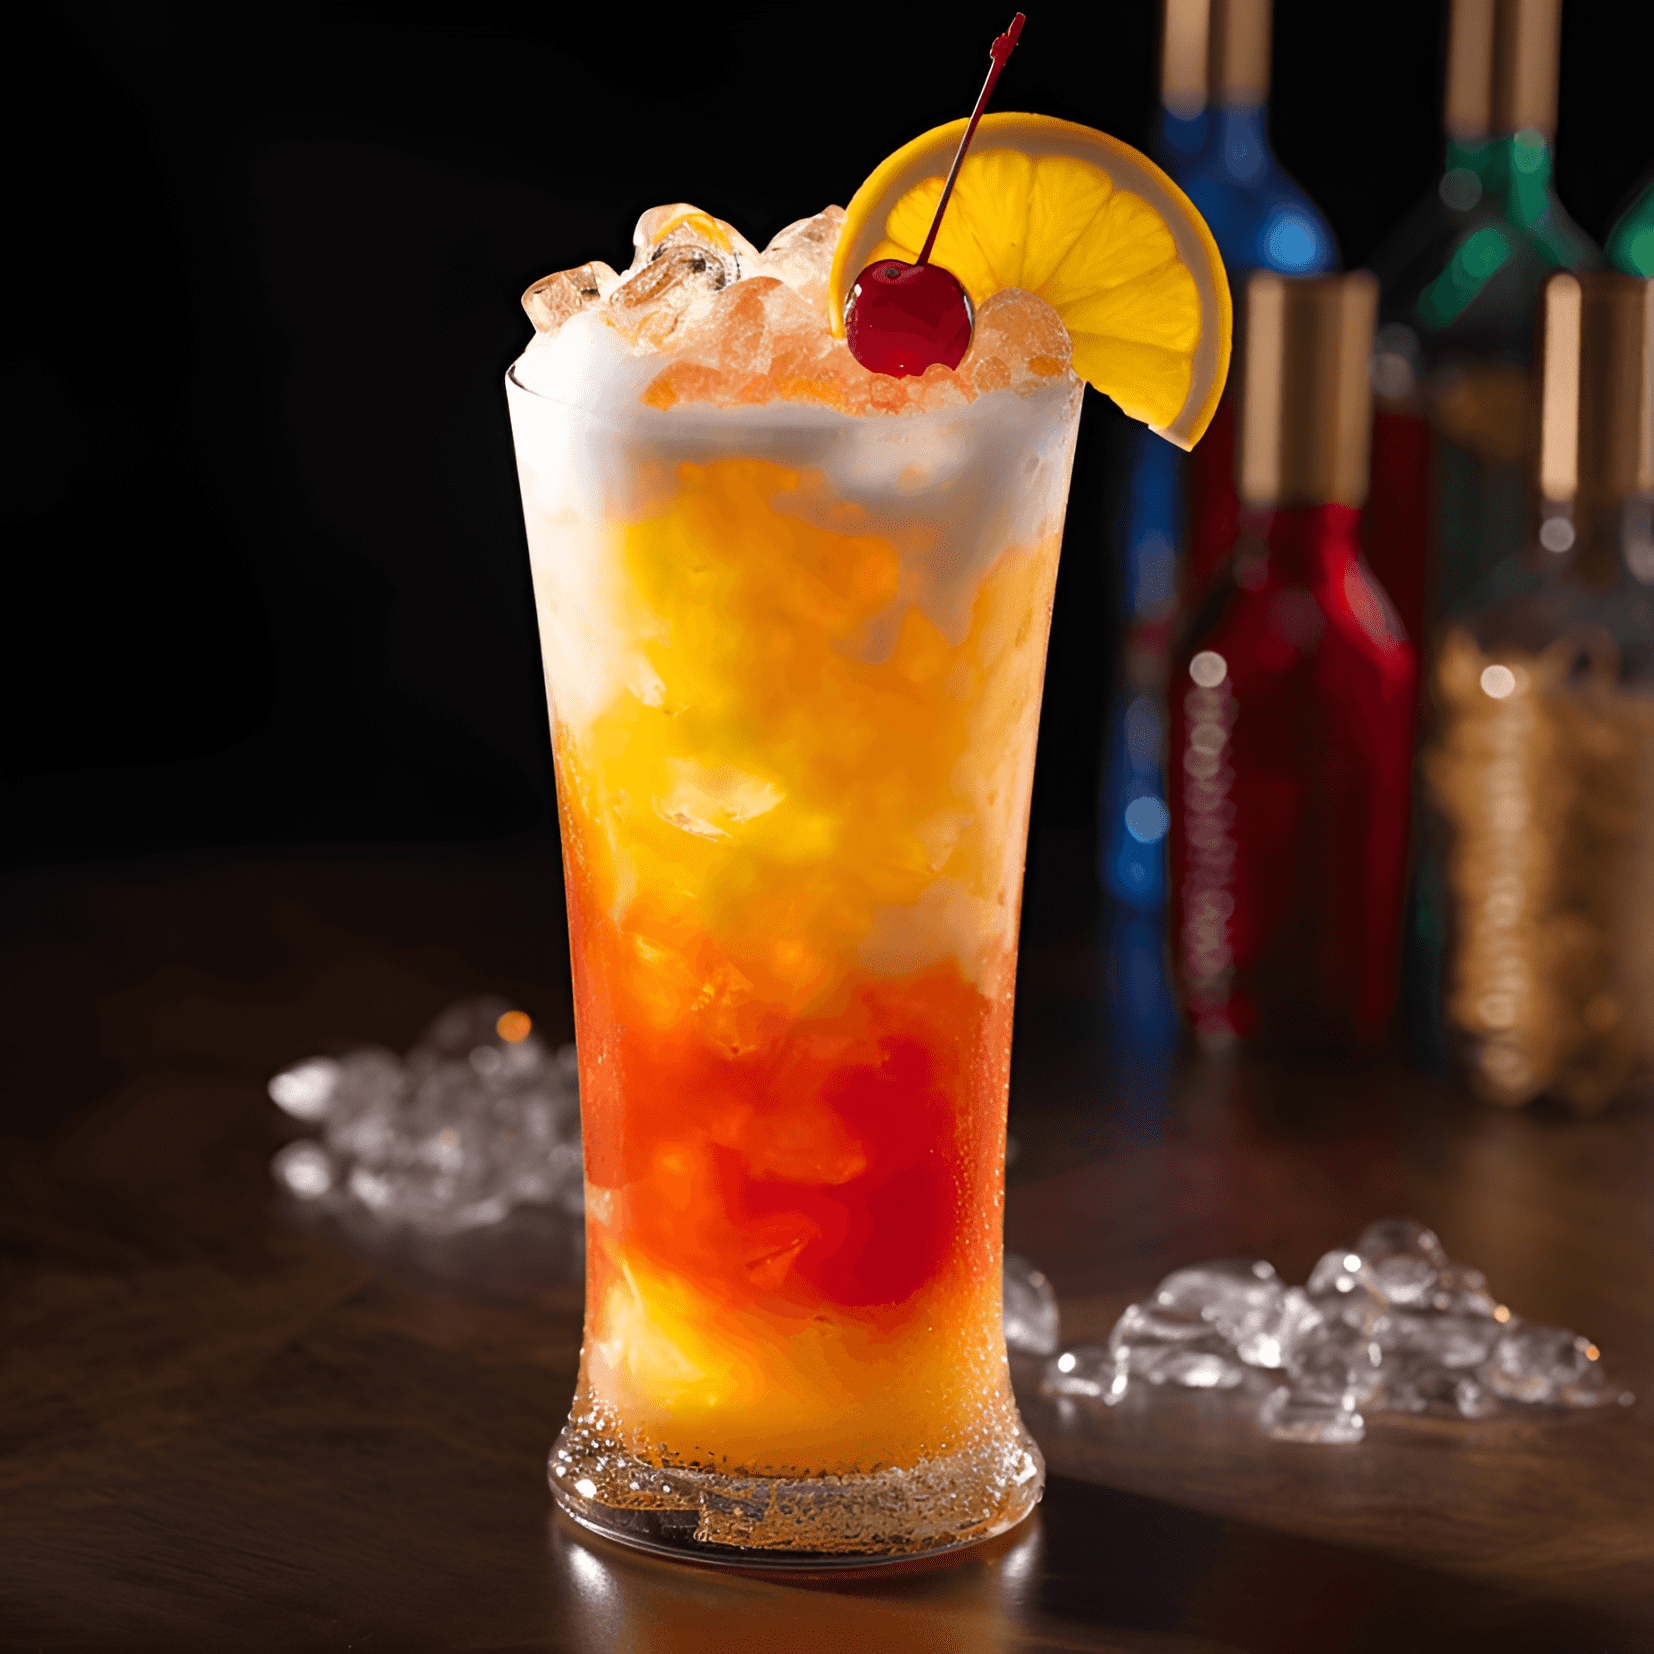 Rum Runner Cocktail Recipe - The Rum Runner is a sweet and fruity cocktail with a hint of tartness. Its flavors are a harmonious blend of tropical fruits, with the rum providing a smooth and warming backbone. The drink is both refreshing and satisfying, making it perfect for sipping on a hot summer day.